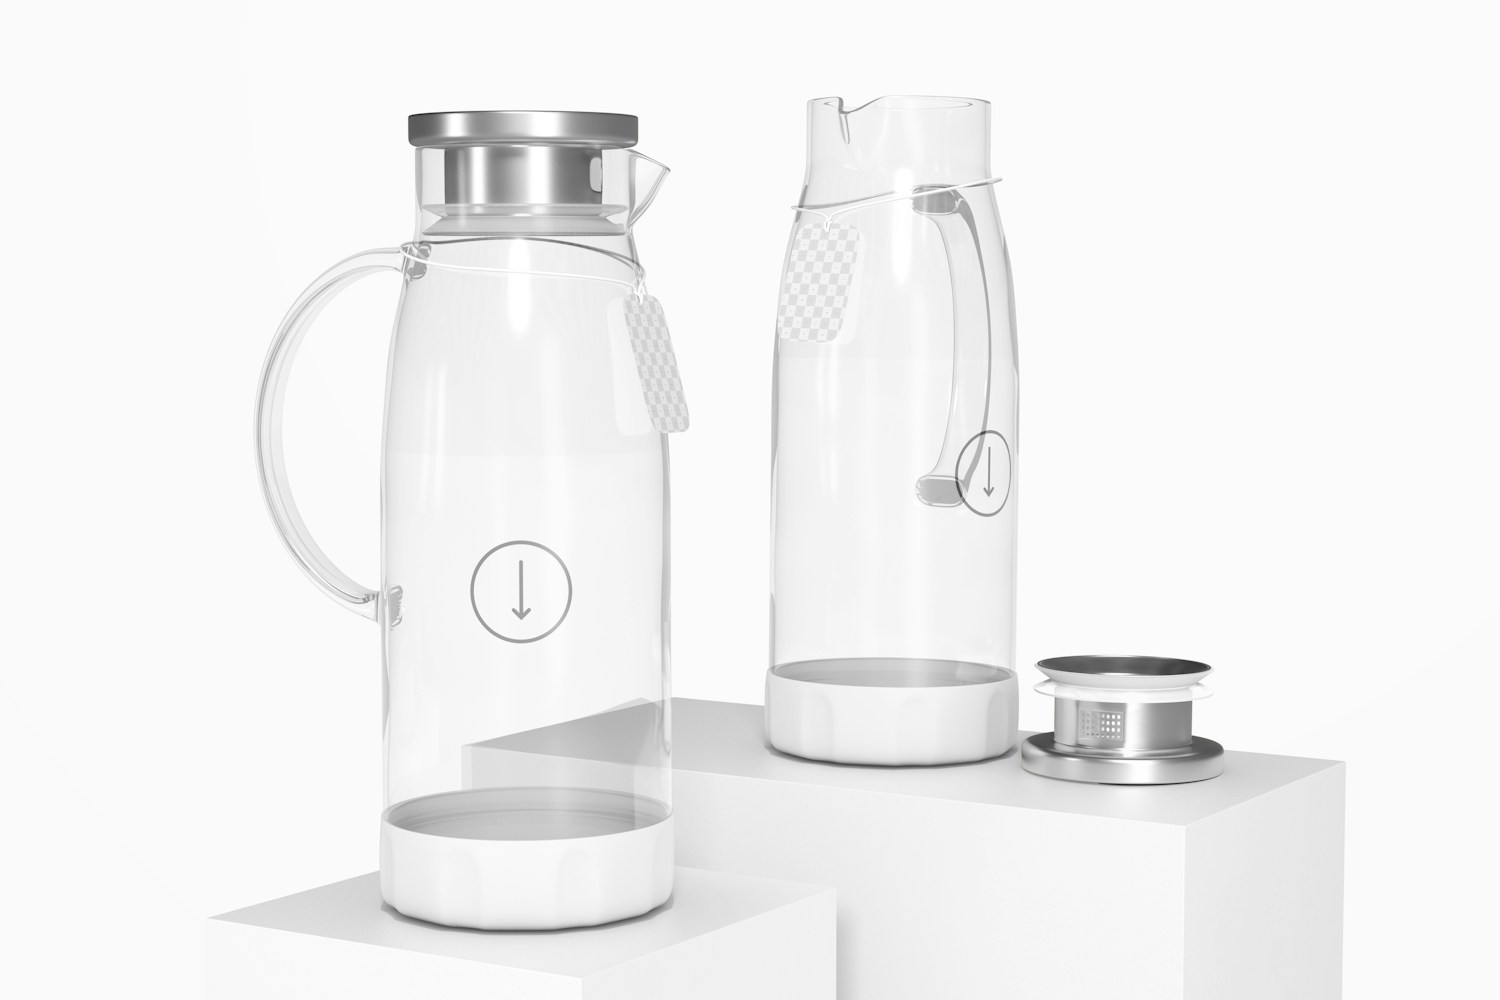 Glass Pitchers with Lid Mockup